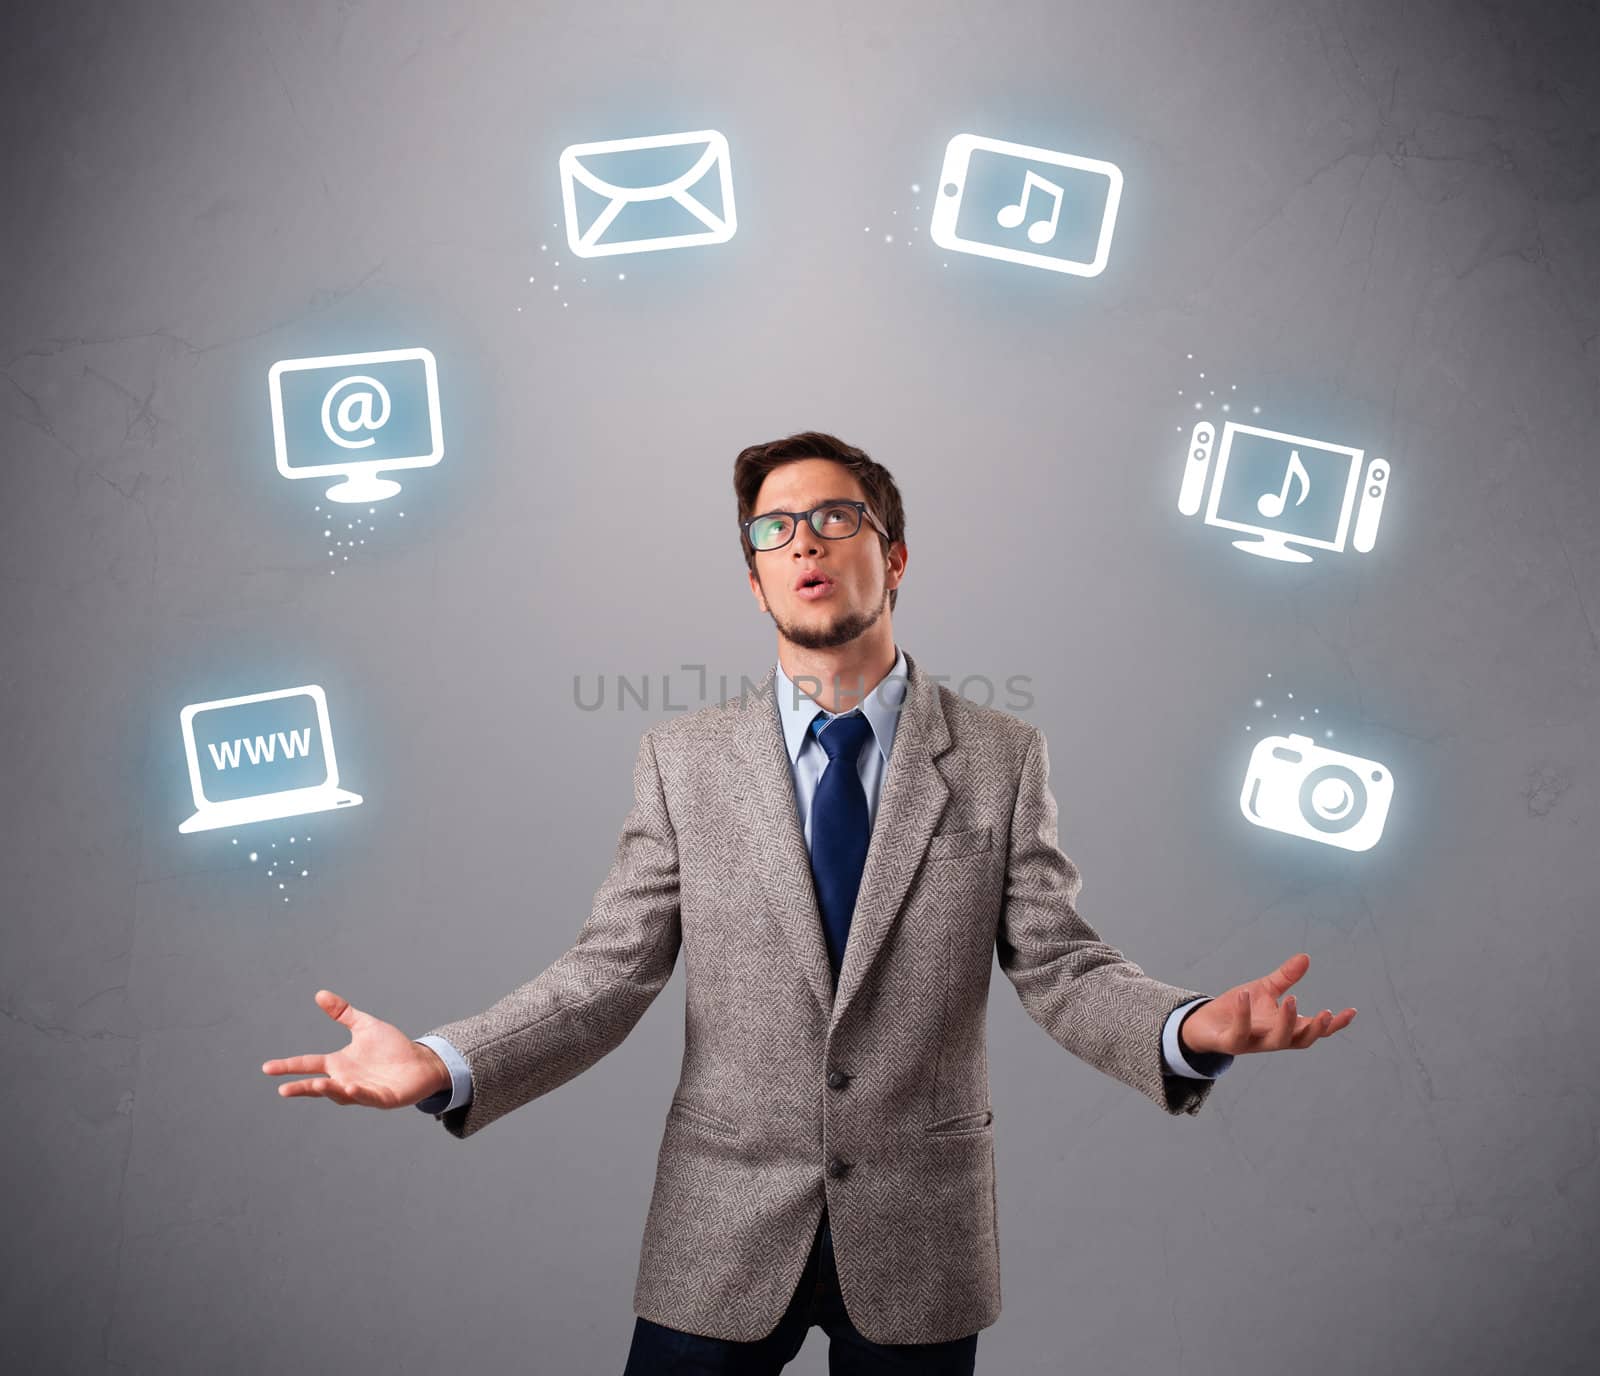 funny boy standing and juggling with electronic devices icons